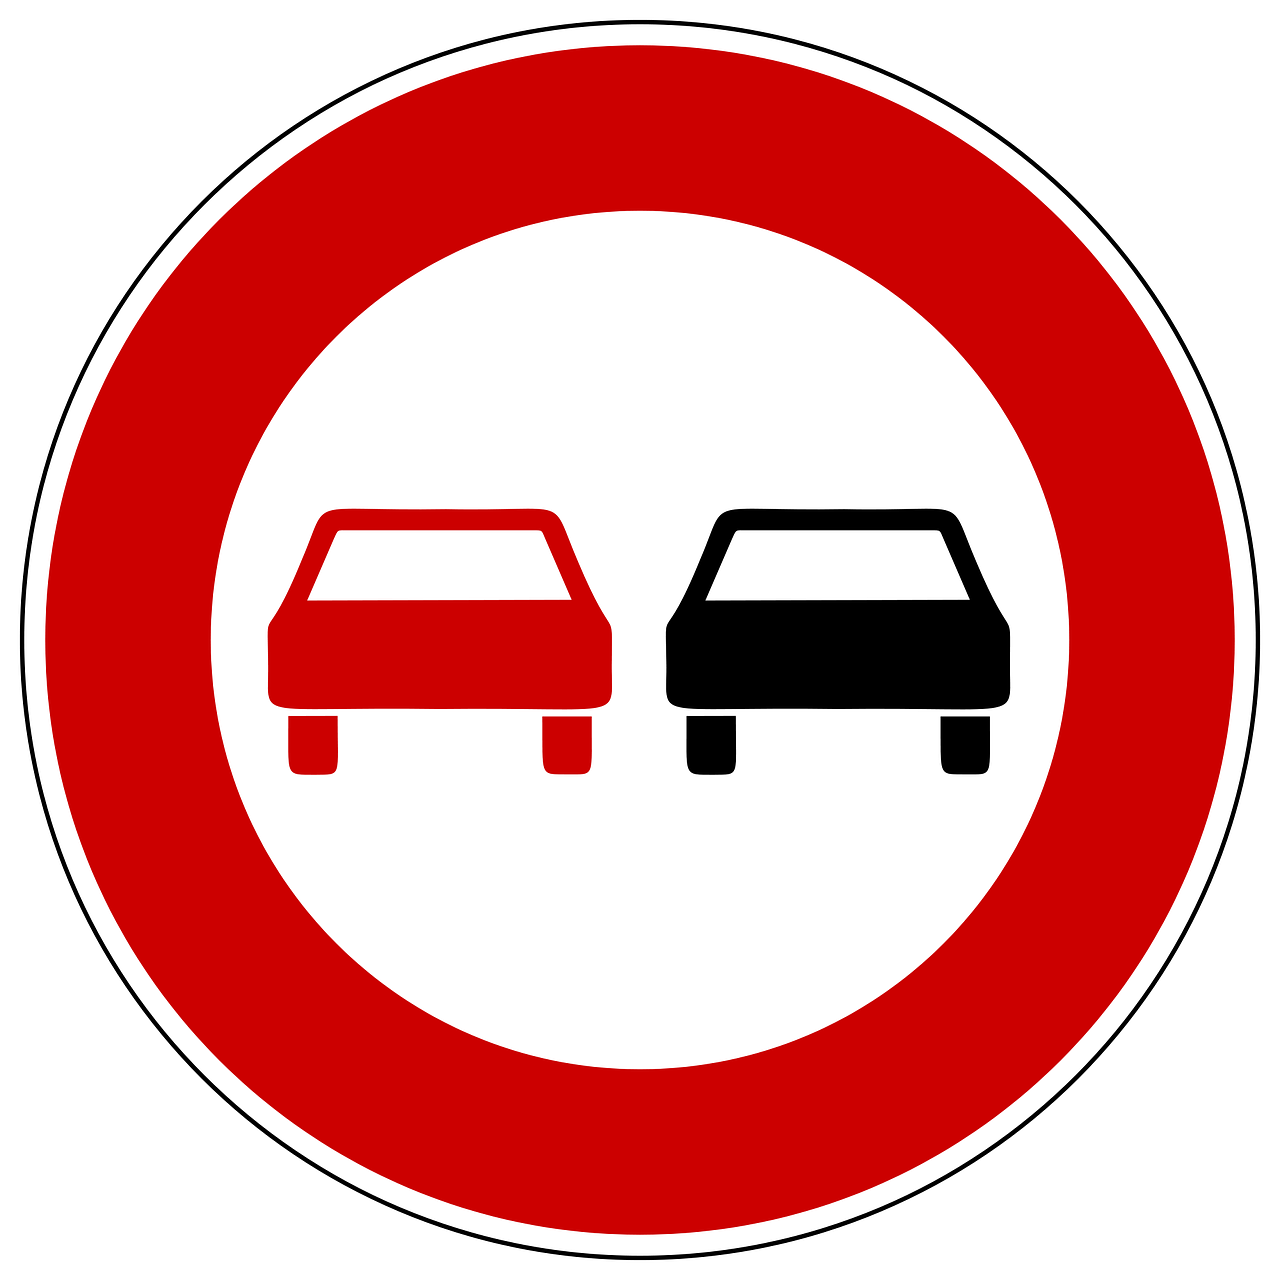 traffic sign,road sign,shield,traffic,road,street sign,drive,auto,ban,overtaking,overtaking motor vehicles,free pictures, free photos, free images, royalty free, free illustrations, public domain